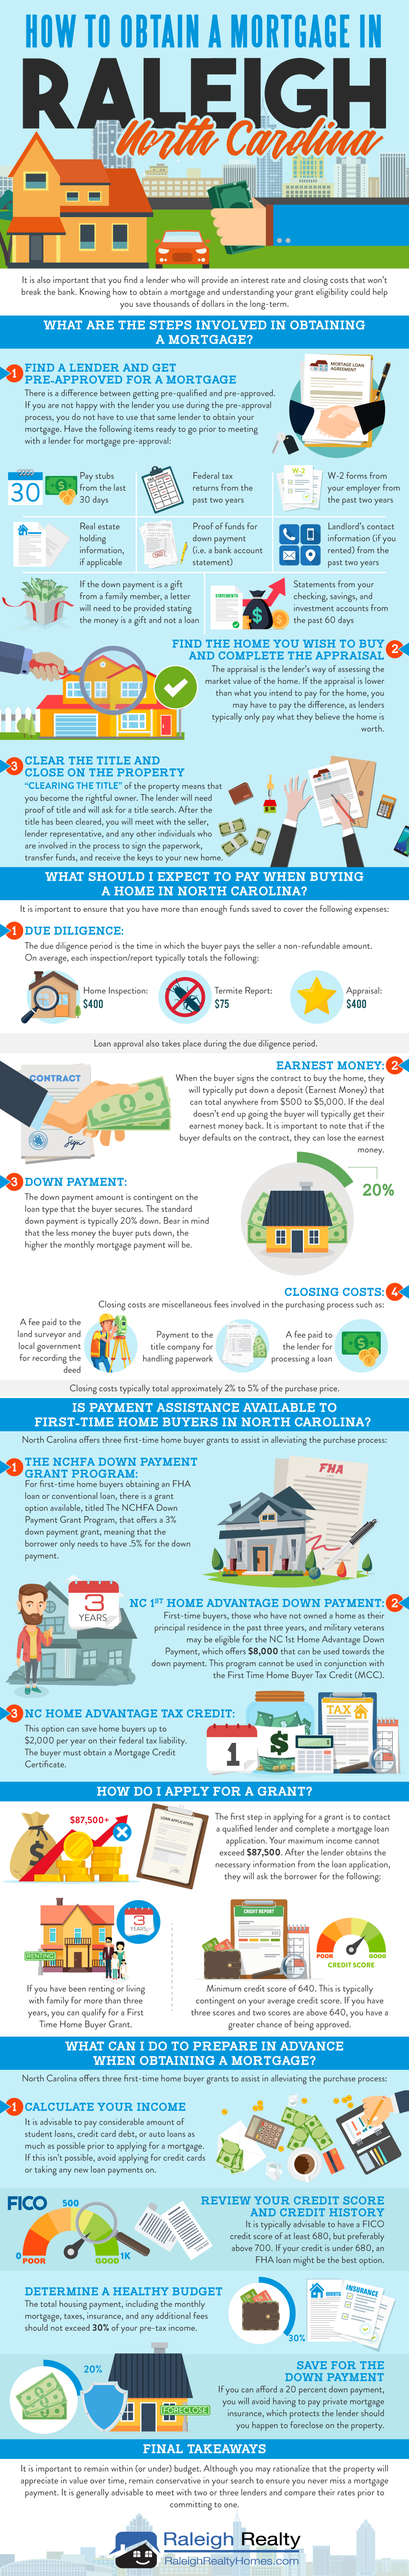 How to Obtain a Mortgage in Raleigh, NC {Infographic}